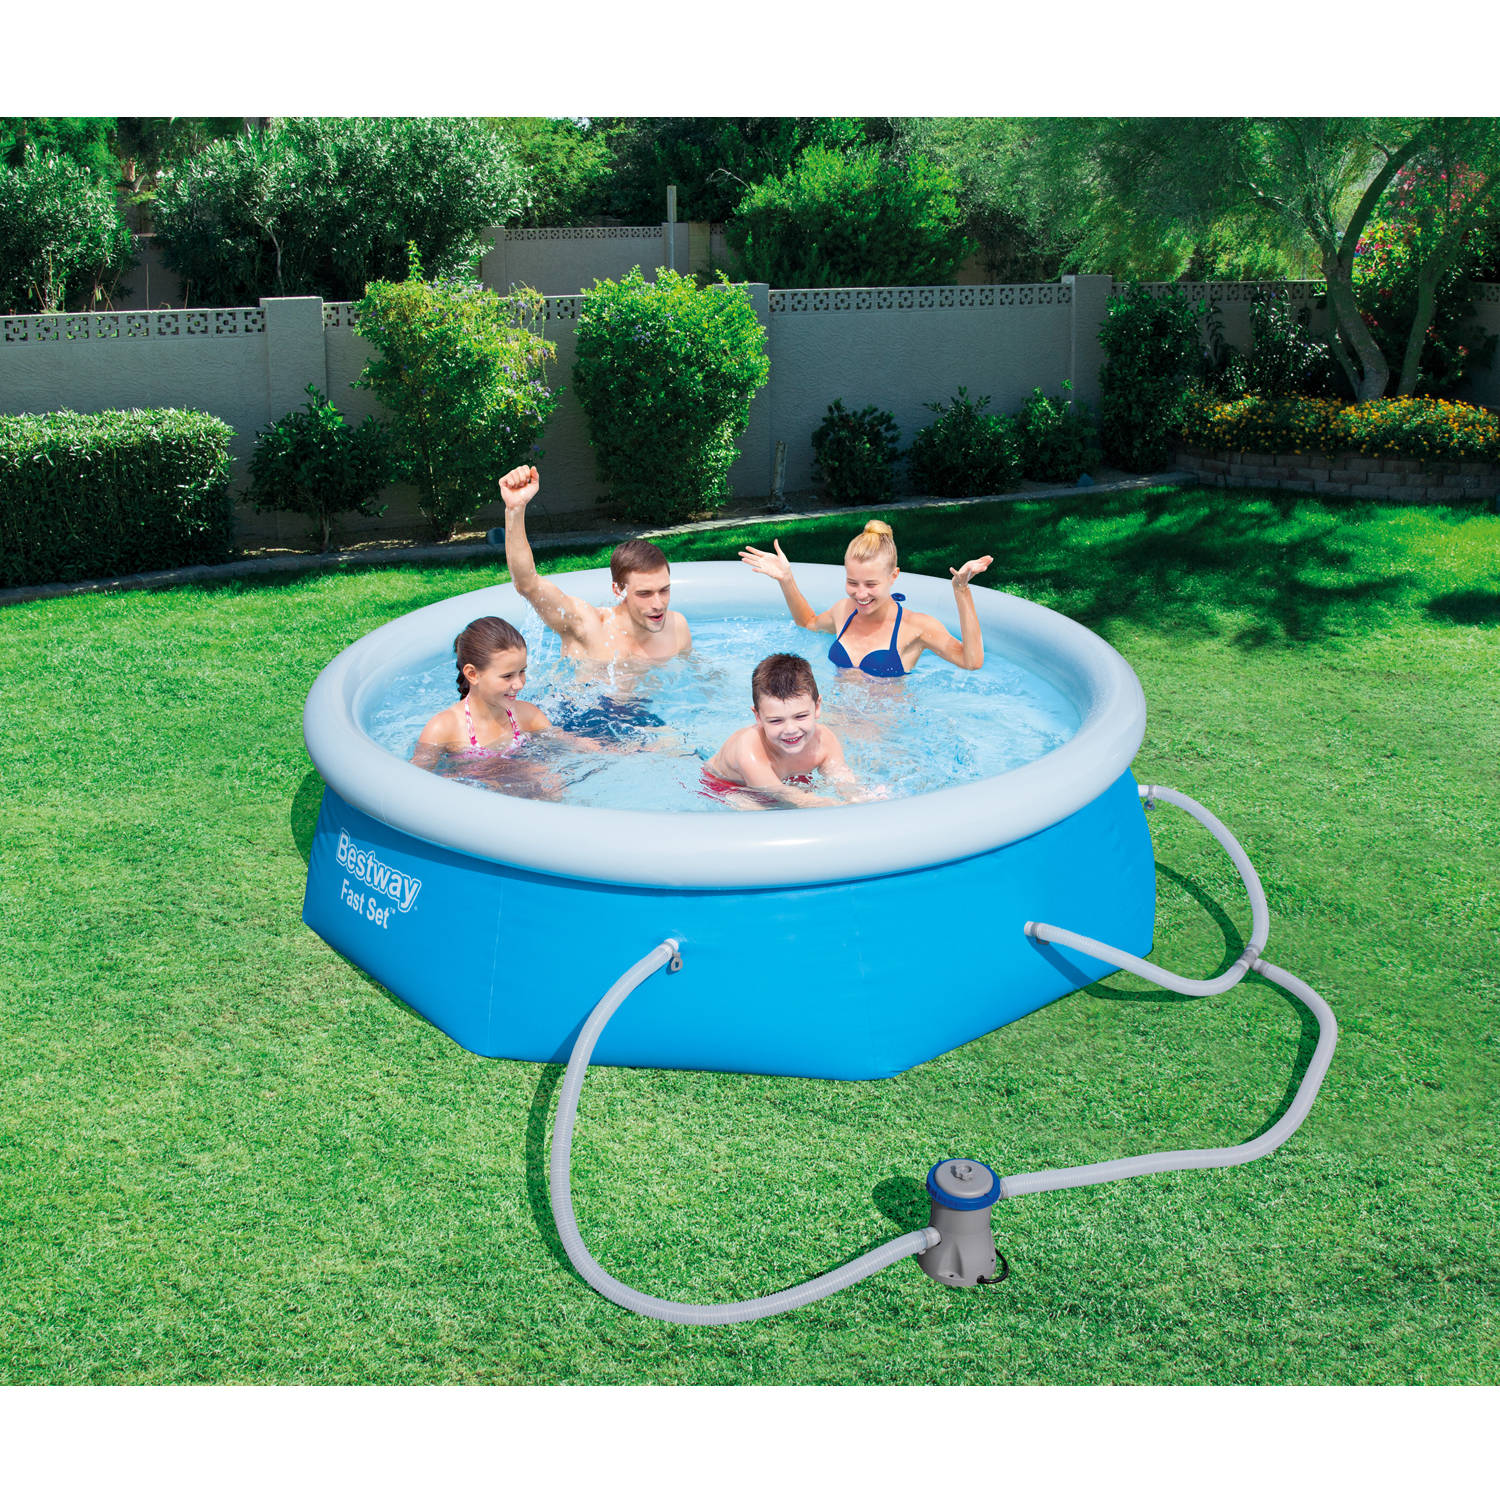 Bestway Fast Set 8' x 26" Swimming Pool Set with Filter Pump - image 5 of 5